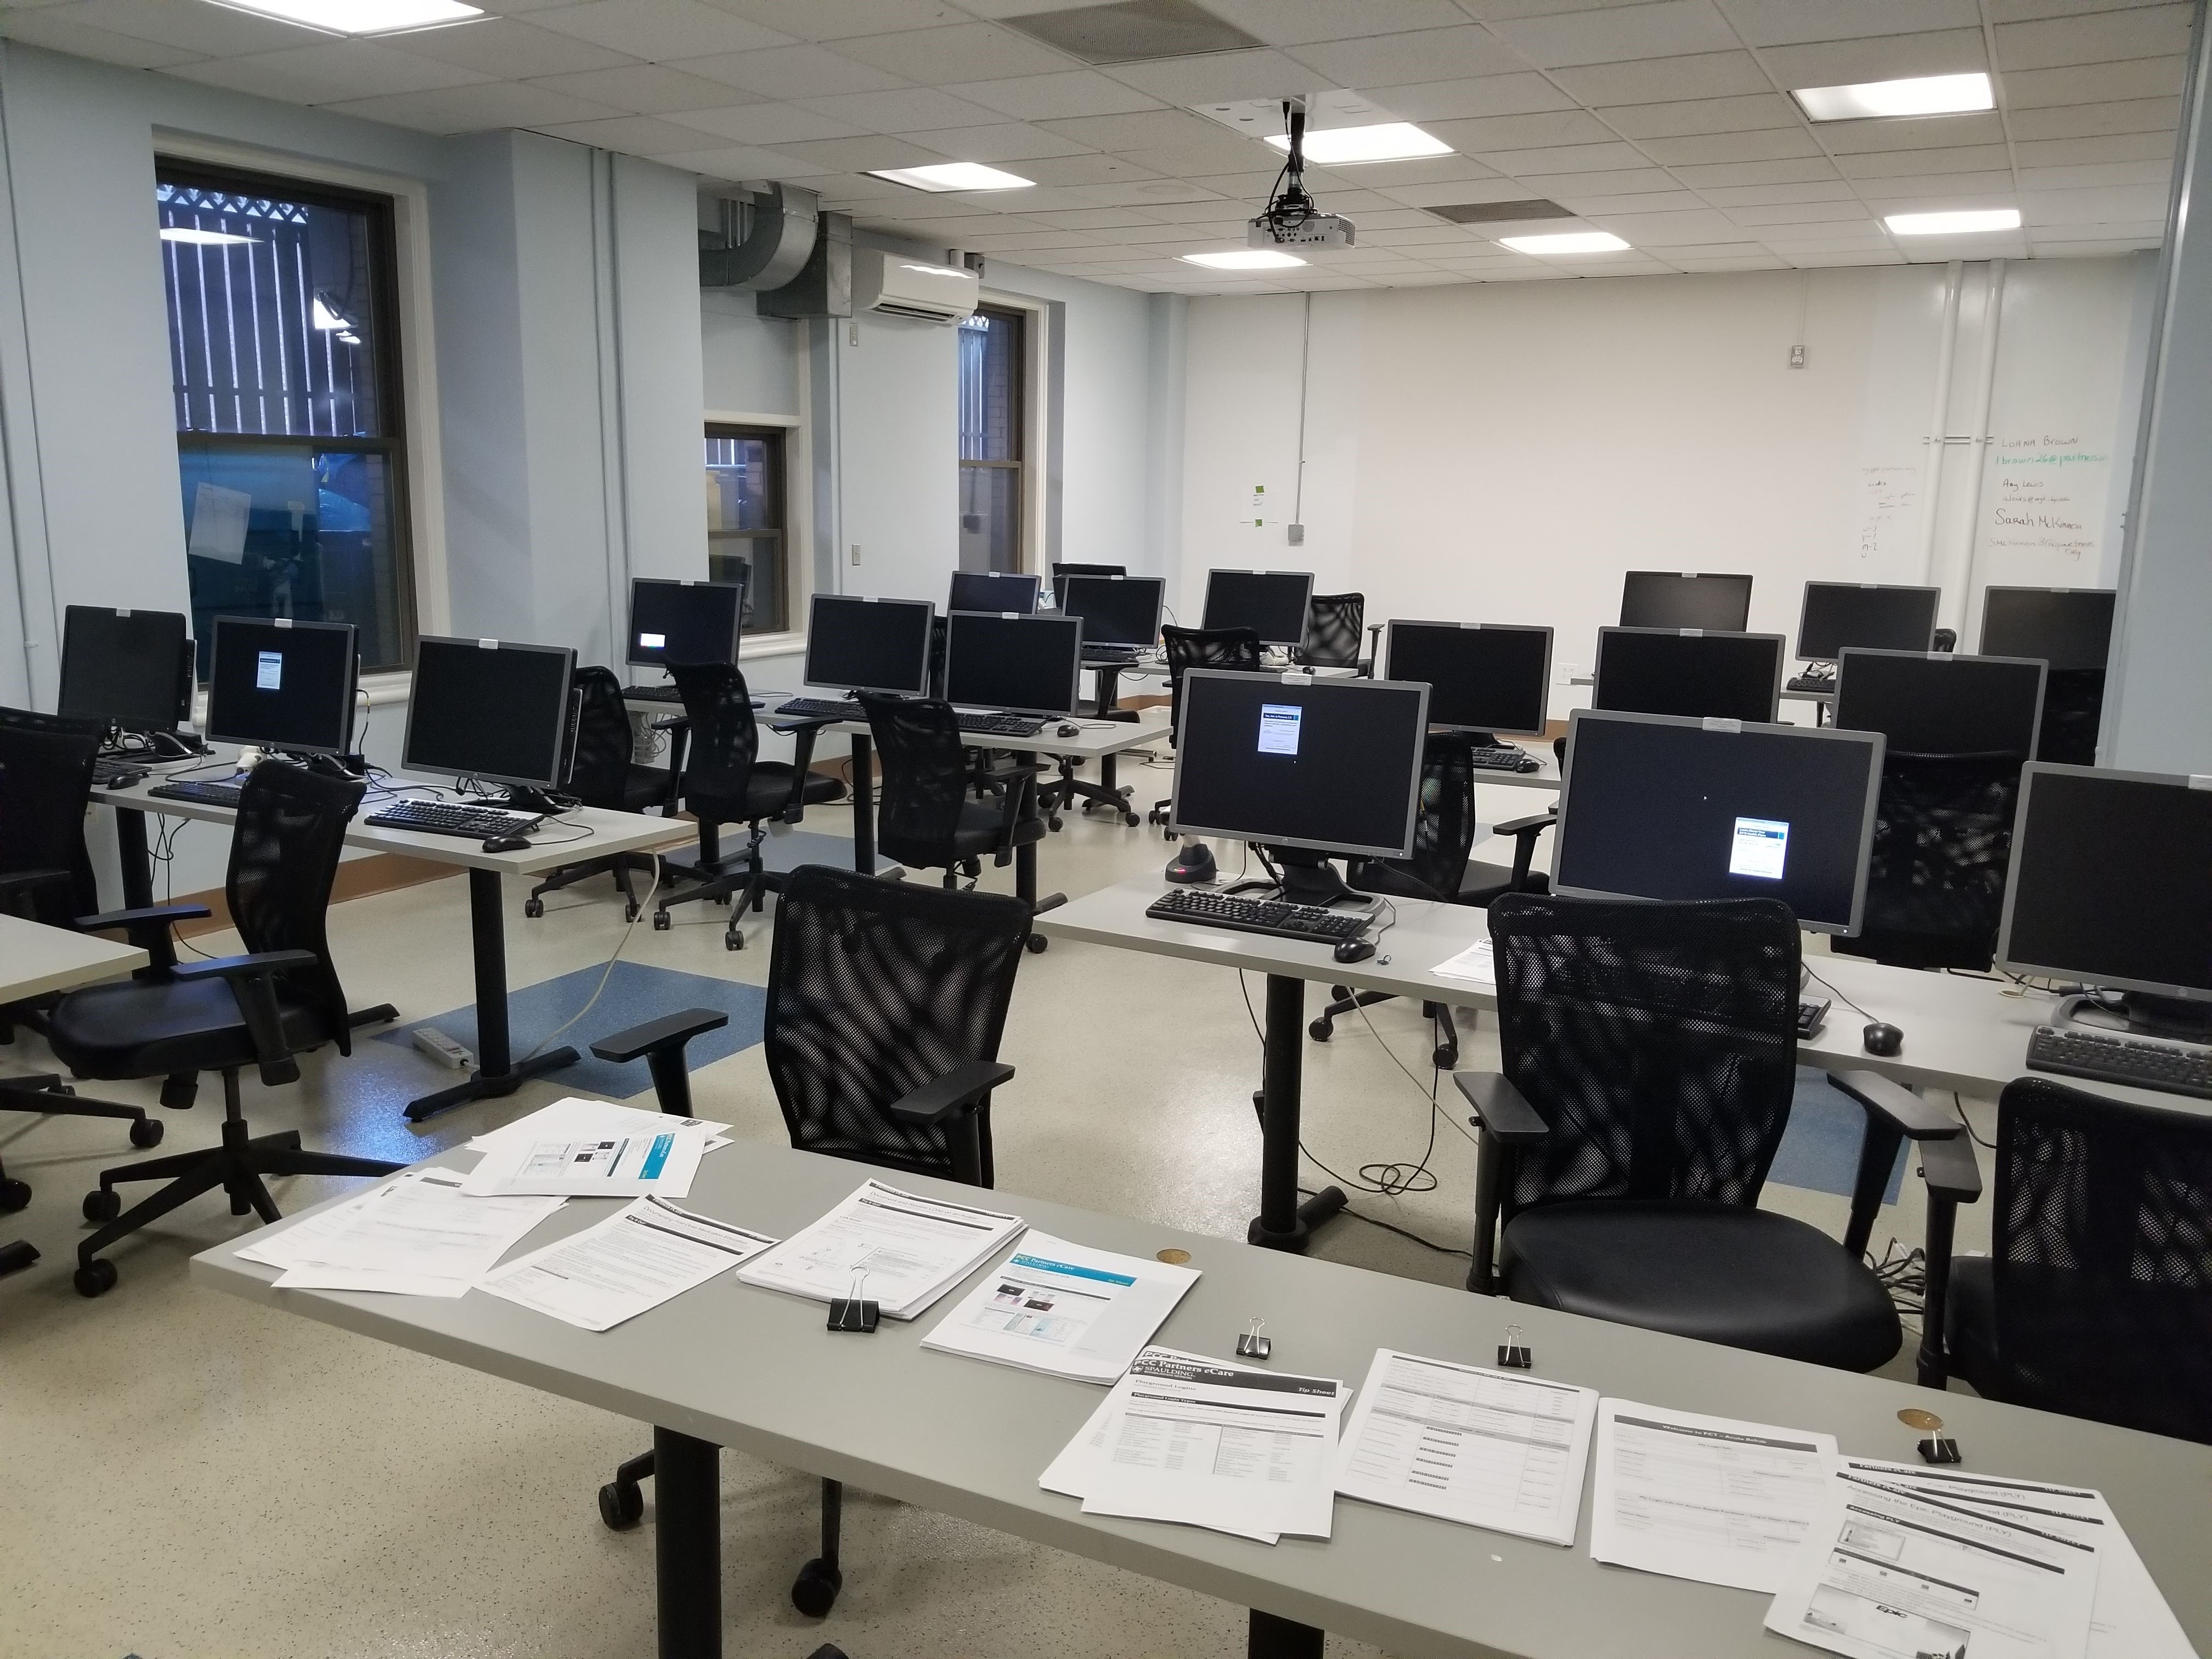 A classroom-style room with rows of tables and chairs, with computers at more desk spots.